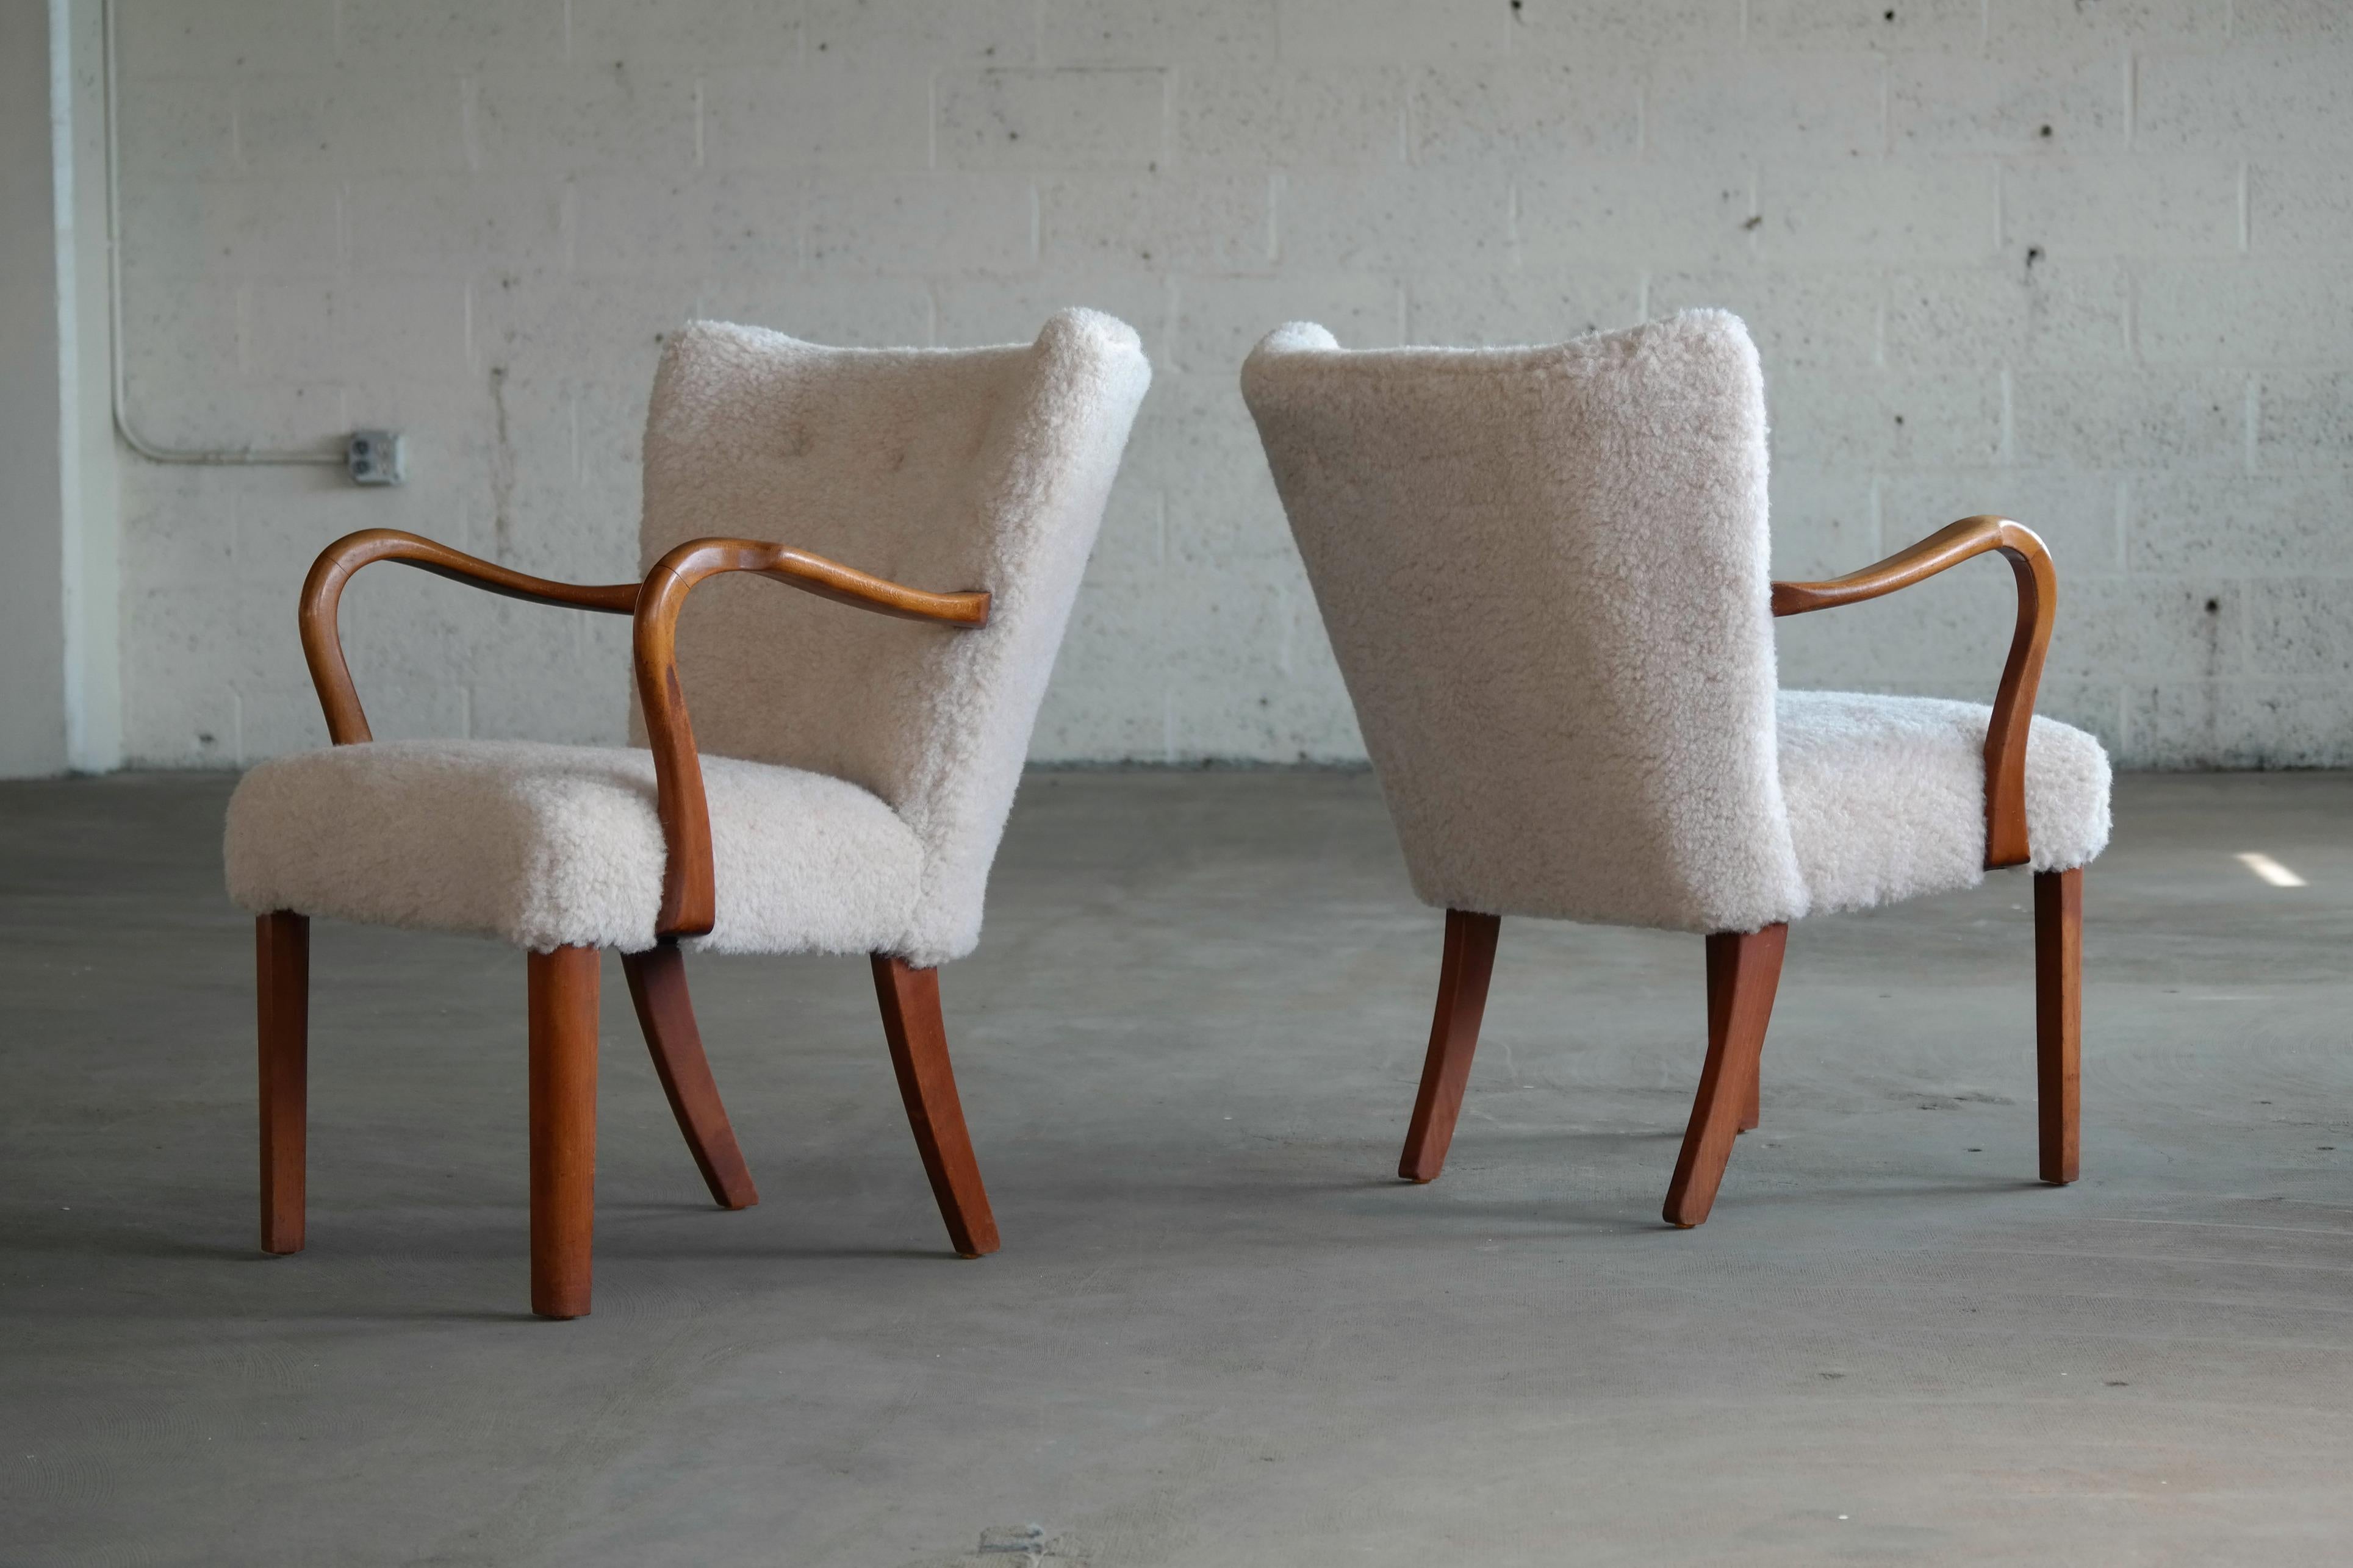 Pair of elegant nice smaller size easy chairs from the late 40's to 1950 very typical of Fritz Hansen's design style both in terms of legs and armrests. Made from stained beechwood with nicely sculpted/carved armrests. Some natural age wear to the